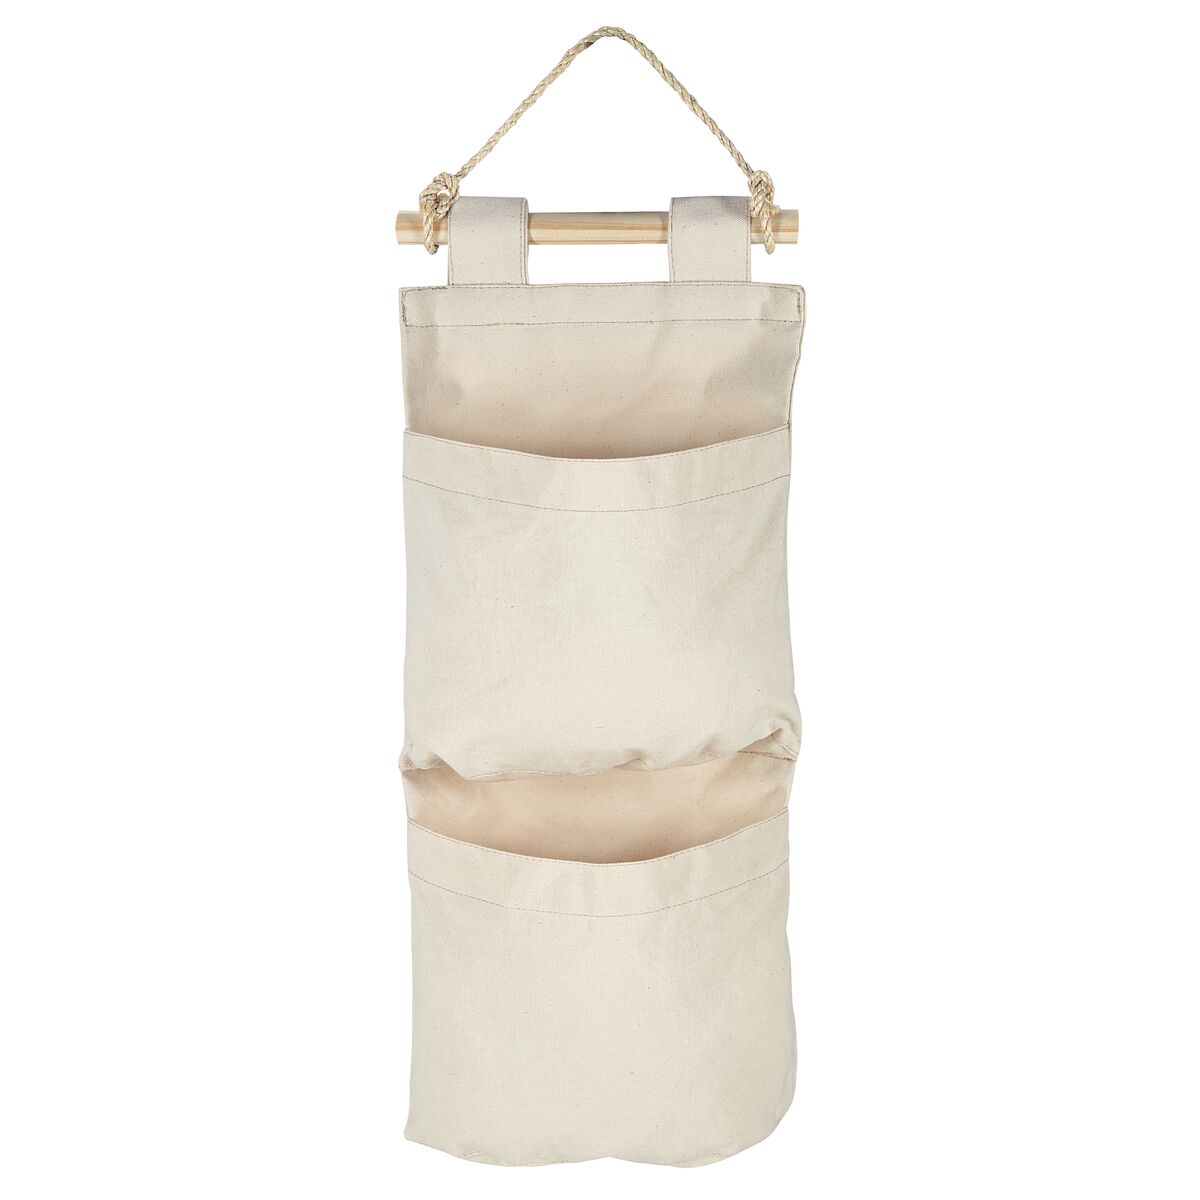 Tramontina Organizer in Natural Canvas with 2 Pockets and Rope for Hanging